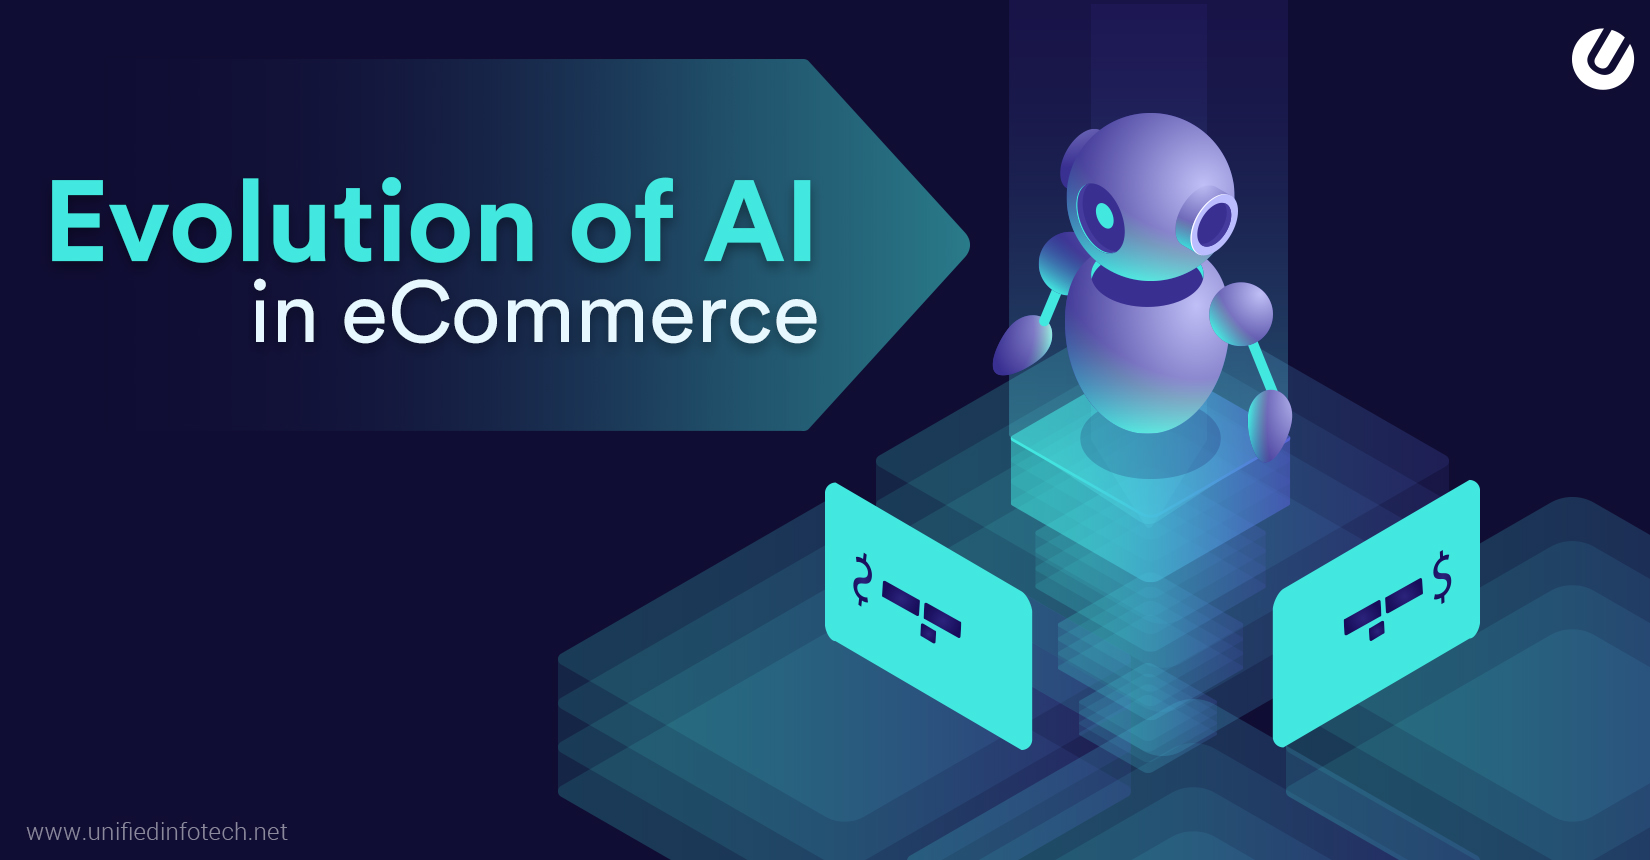 Evolution of AI in eCommerce Industry and What to Expect in 2020?